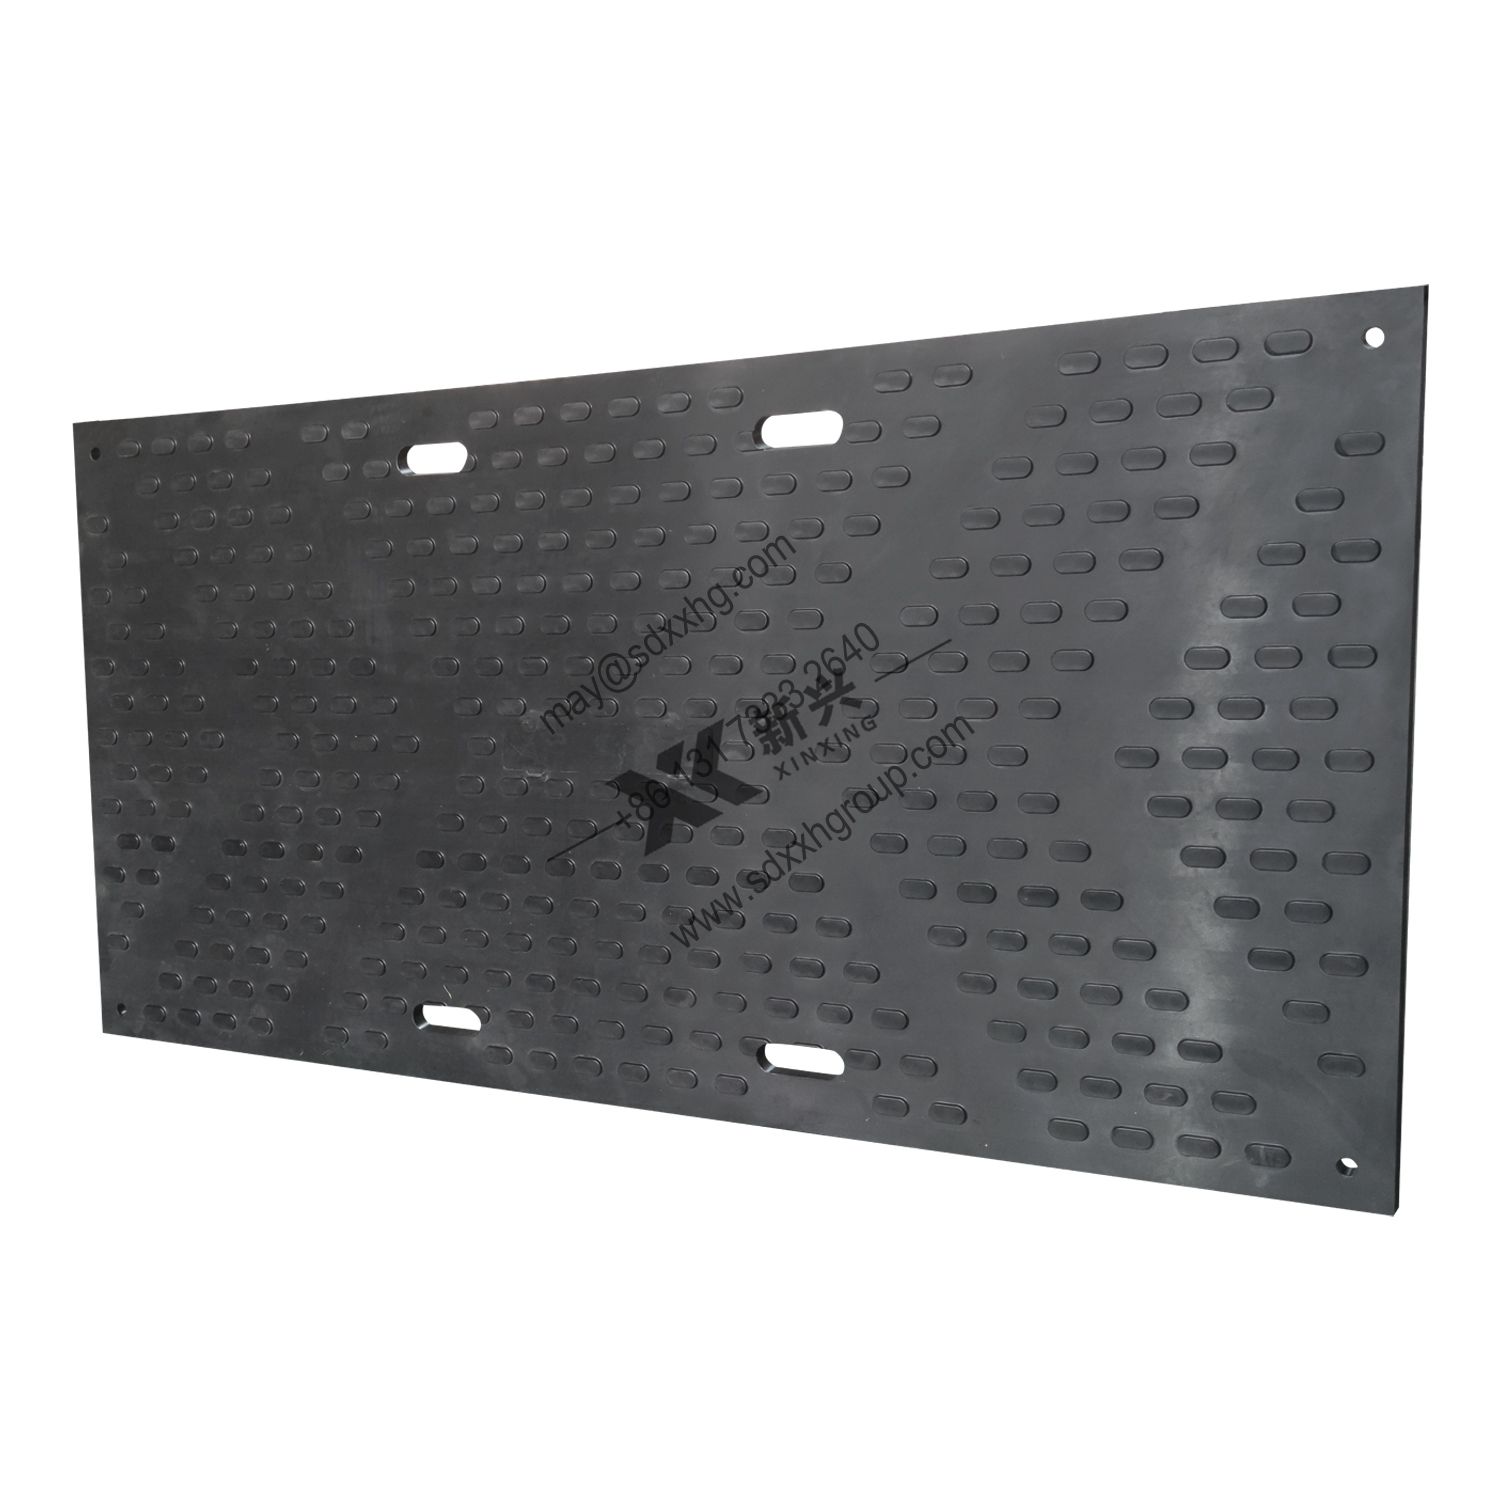 composite heavy duty ground protection mat event mat